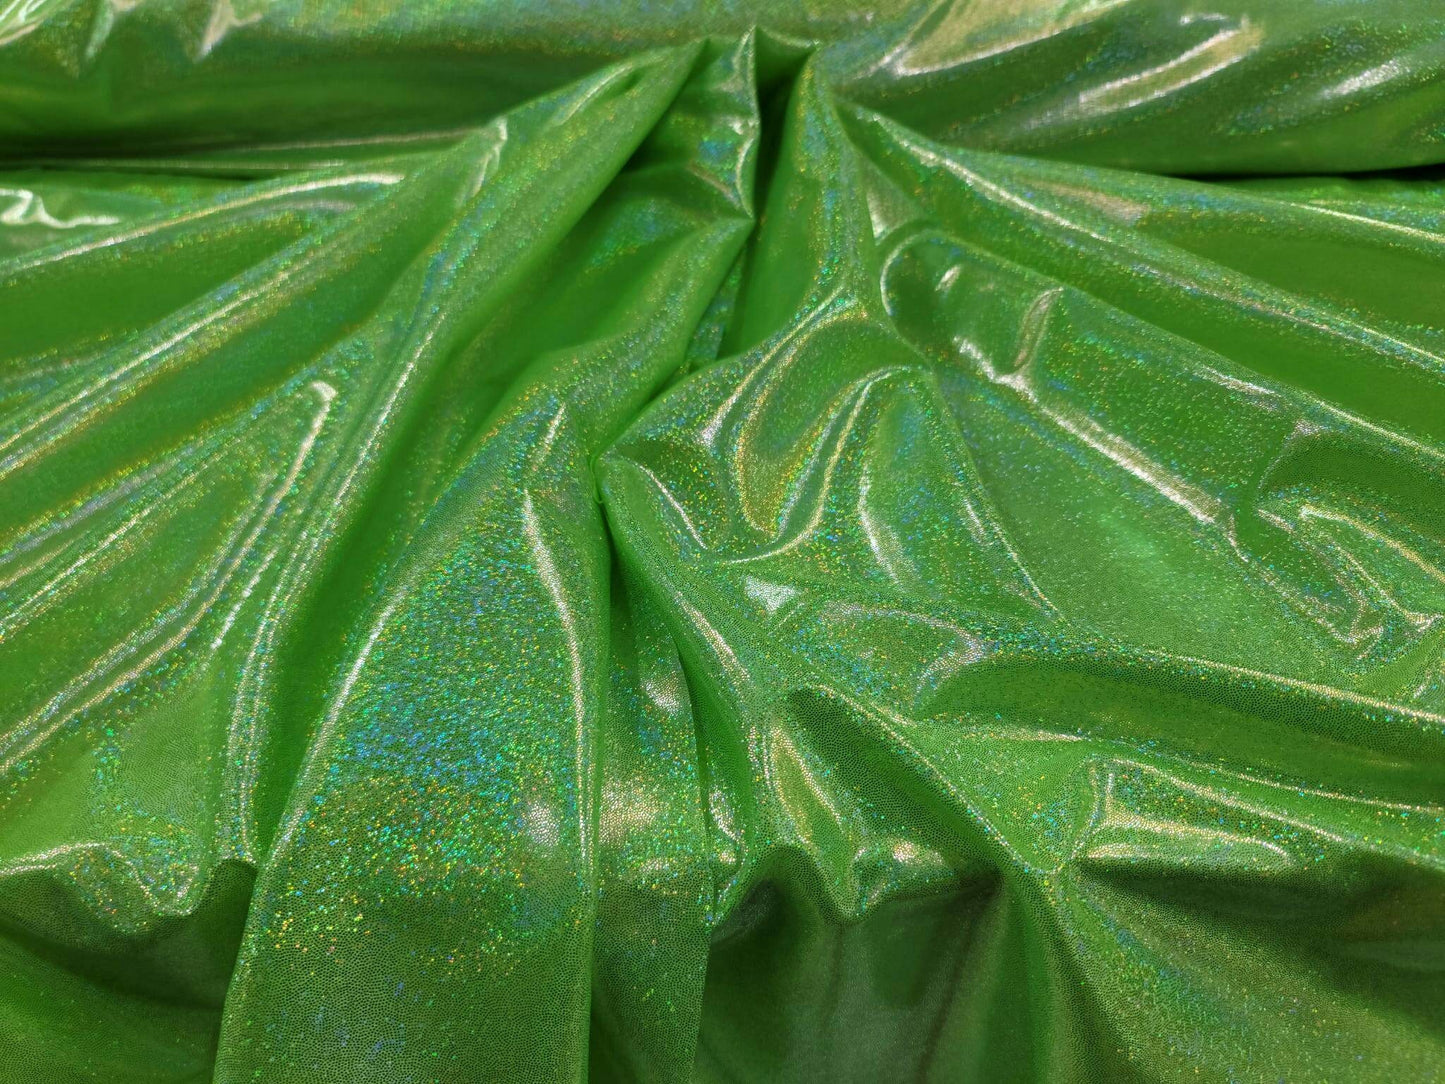 Neón Green Sparkly Shimmer Glossy Iridescent Ligth Weight Foil Fabric Sold By The Yard Hologram Glitz Glitter Lame Foil